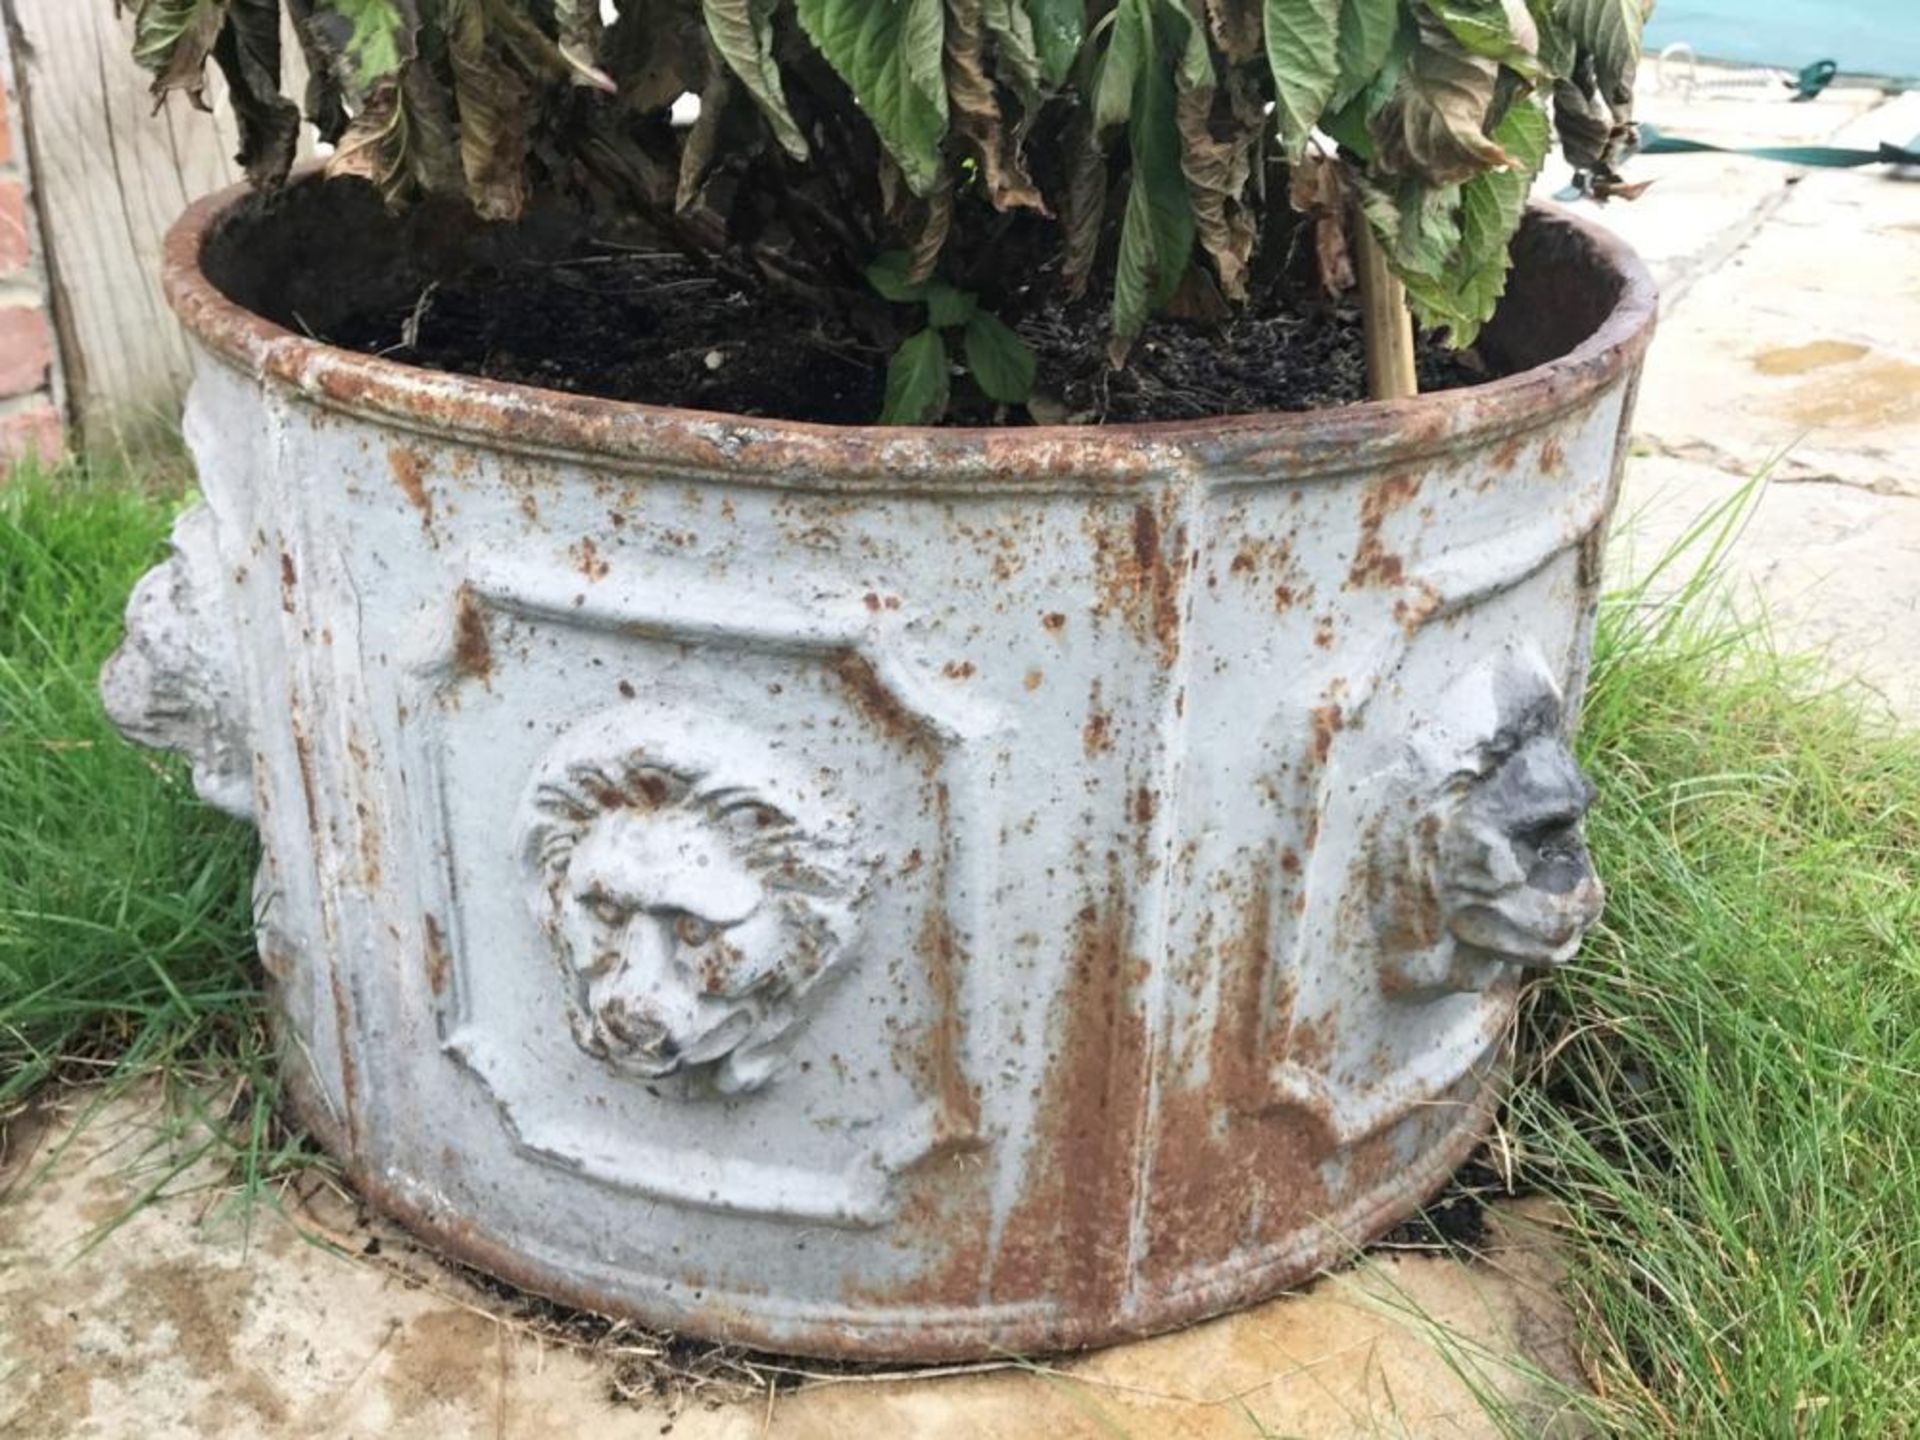 1 x Large Round Cast Iron Planter / Trough With Lion Heads Around The Circumference - Dimensions: Di - Image 3 of 3